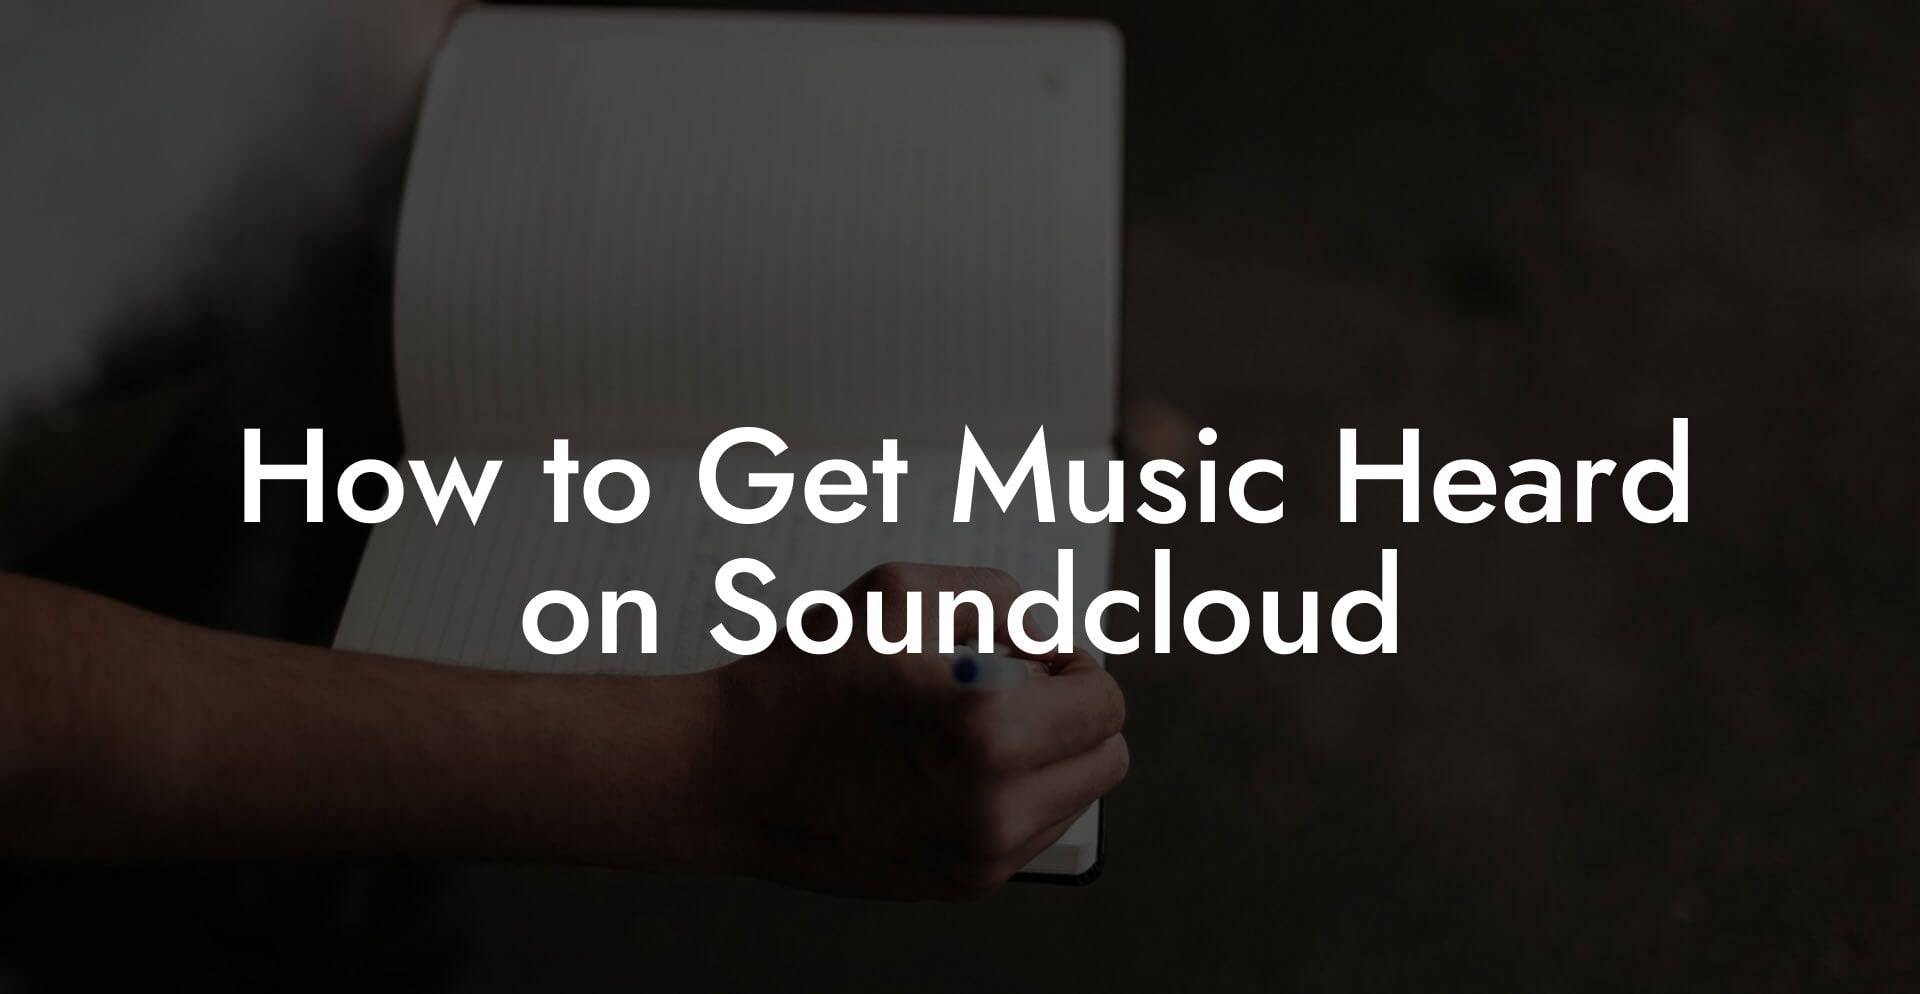 How to Get Music Heard on Soundcloud